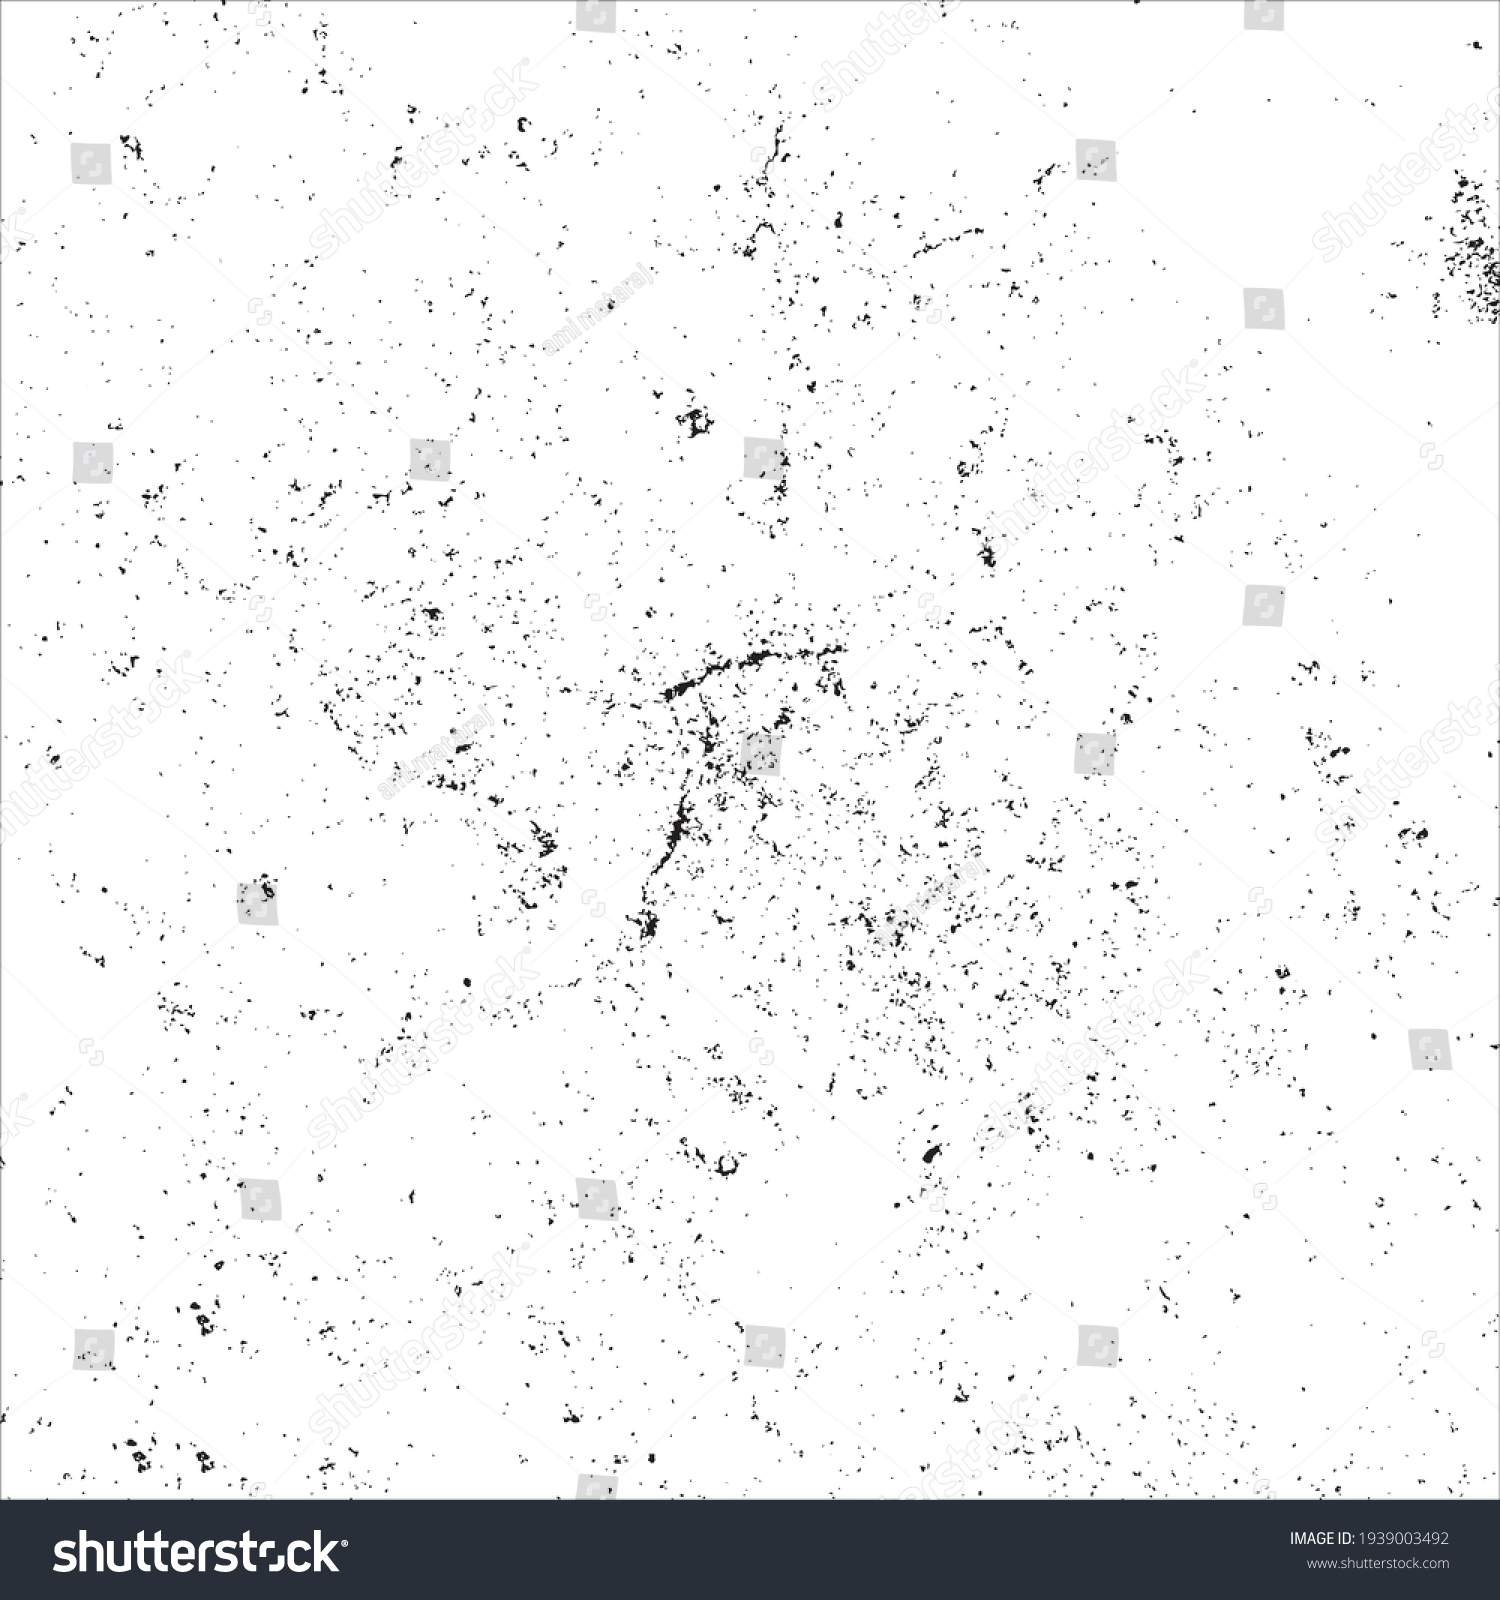 vector black and white ink splats.abstract background illustration. #1939003492